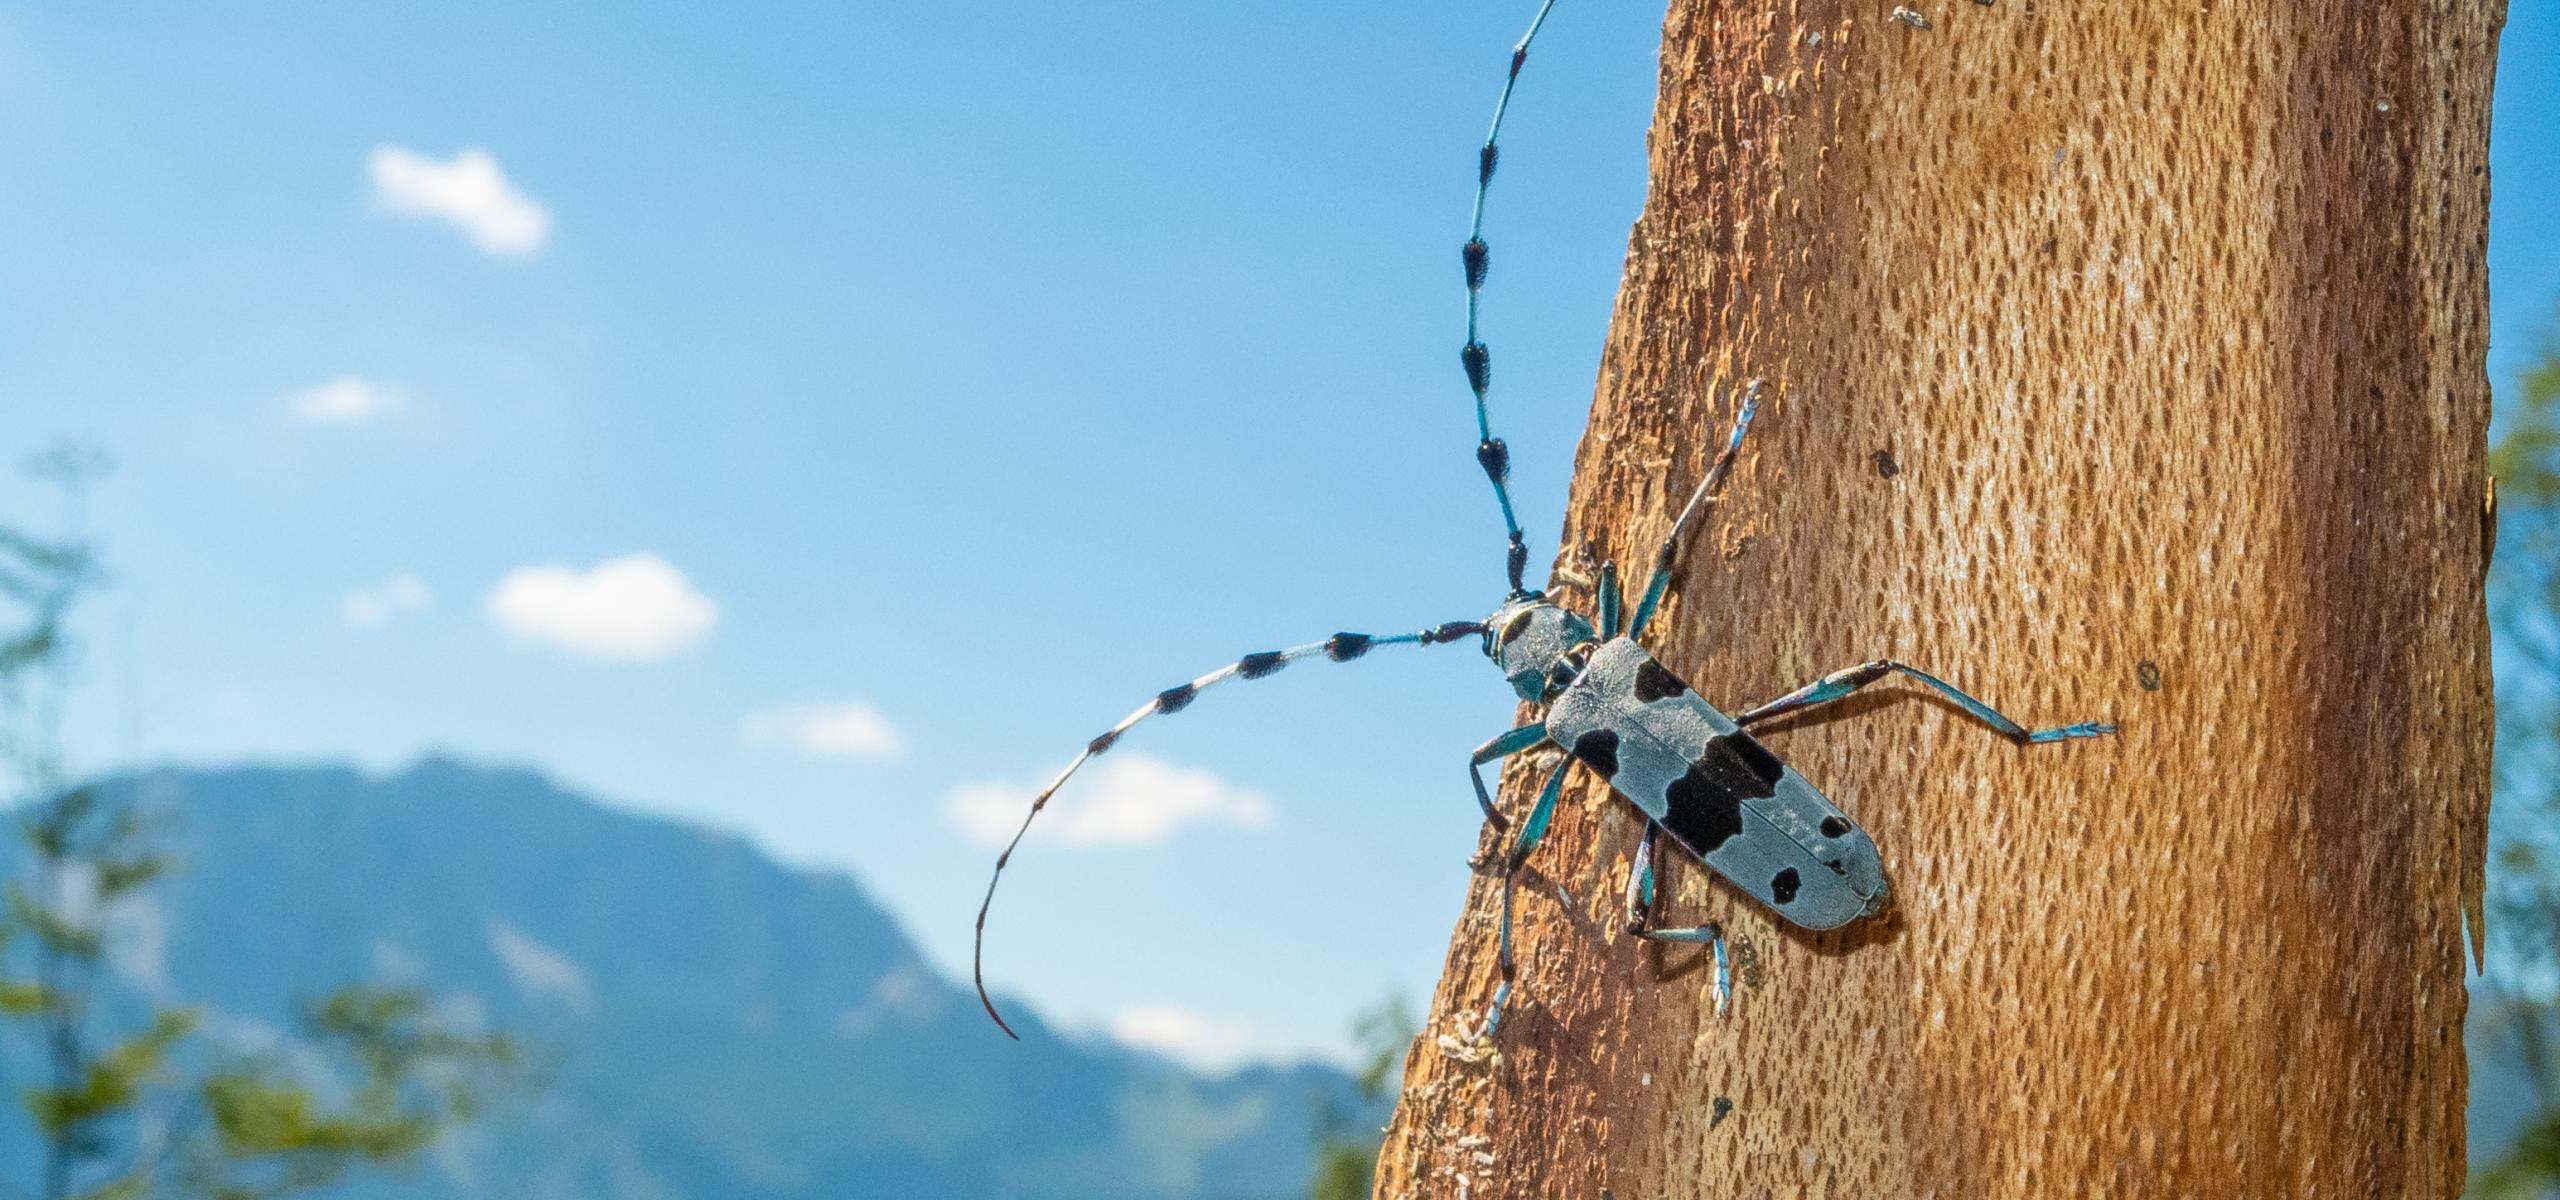 Blue shiny alpine longhorned beetle with black bands on elytra and antennae sits on a piece of bark